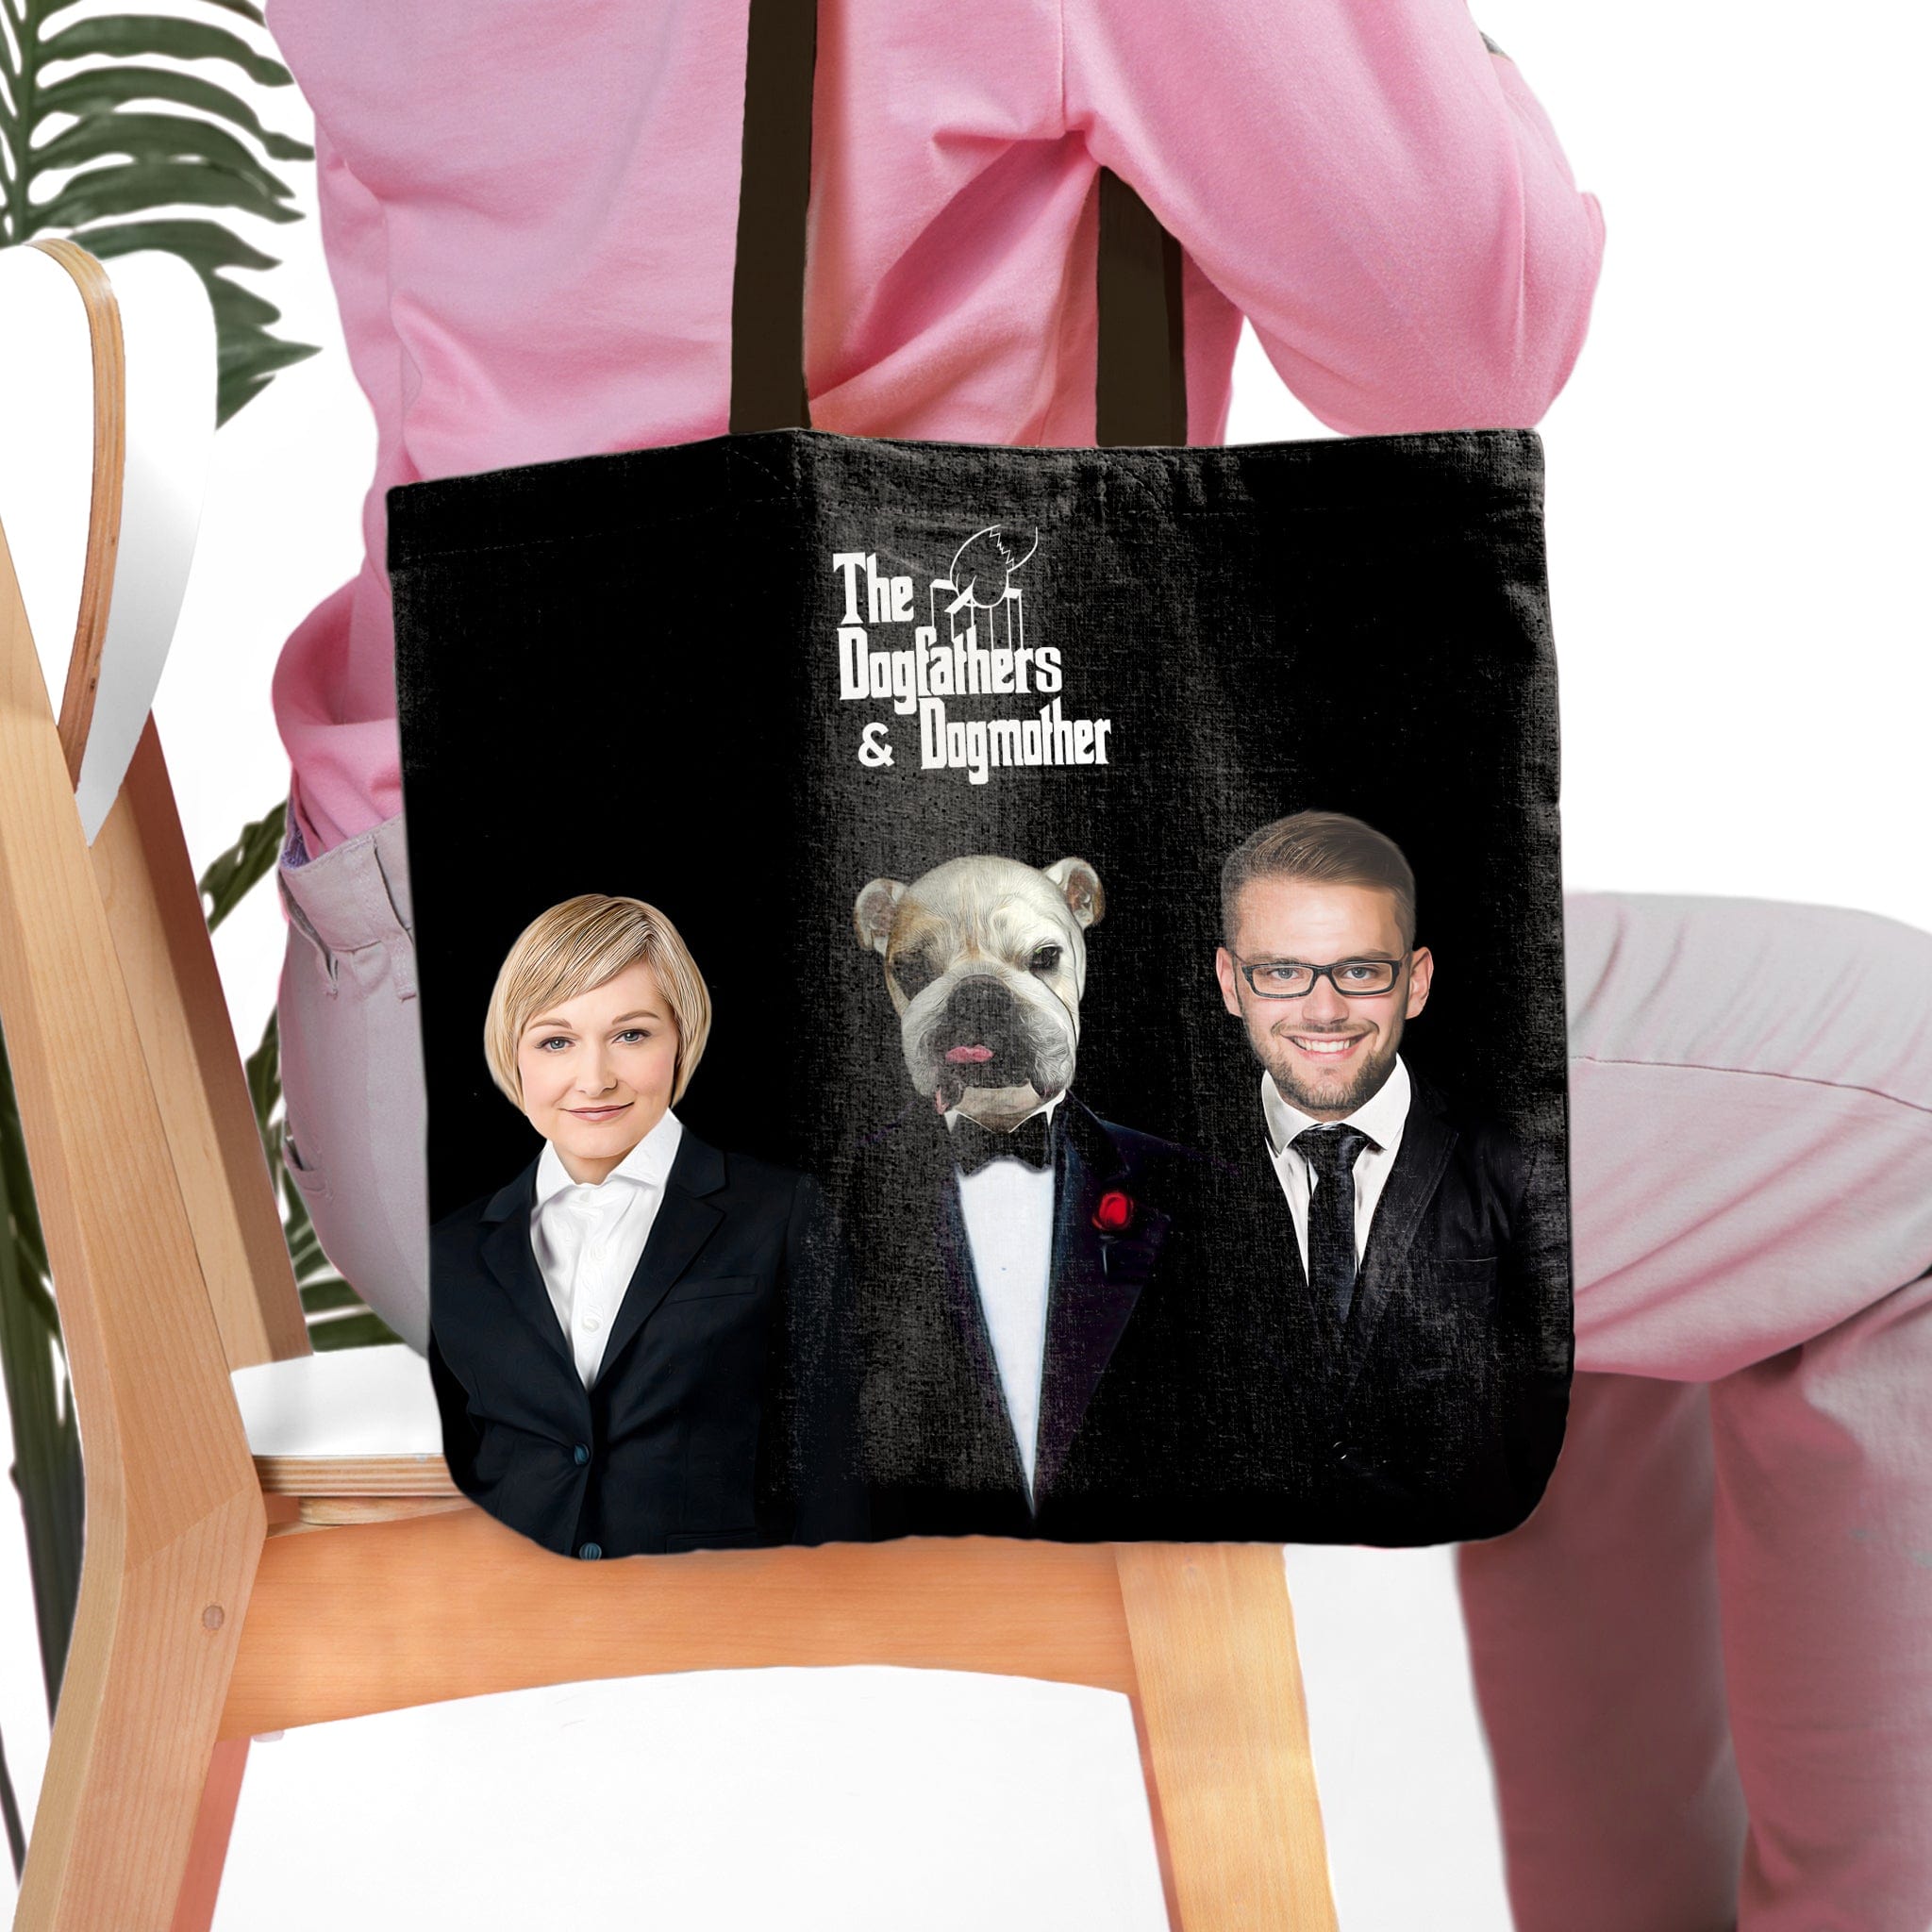 &#39;The Dogfathers &amp; Dogmother&#39; Personalized Pet/Human Tote Bag